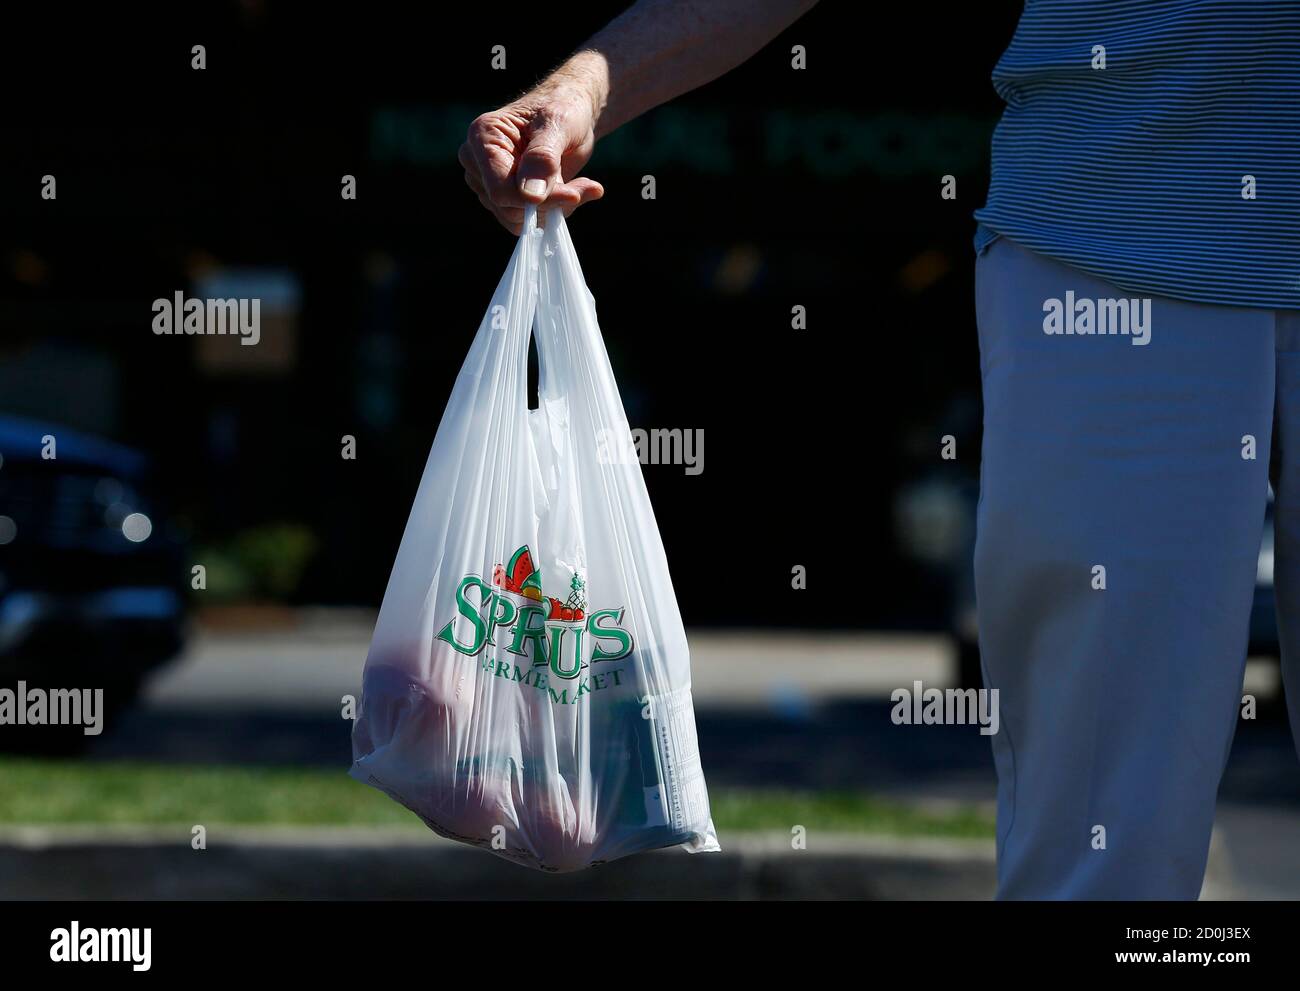 A shopper carries his groceries to his car in a plastic bag after shopping at a Sprouts grocery store in San Diego, California September 30, 2014. Single-use plastic bags are set to disappear from California grocery stores over the next two years under a first-in-the-nation state law signed on Tuesday by Democratic Governor Jerry Brown, despite opposition from bag manufacturers.      REUTERS/Mike Blake (UNITED STATES - Tags: BUSINESS ENVIRONMENT) Stock Photo